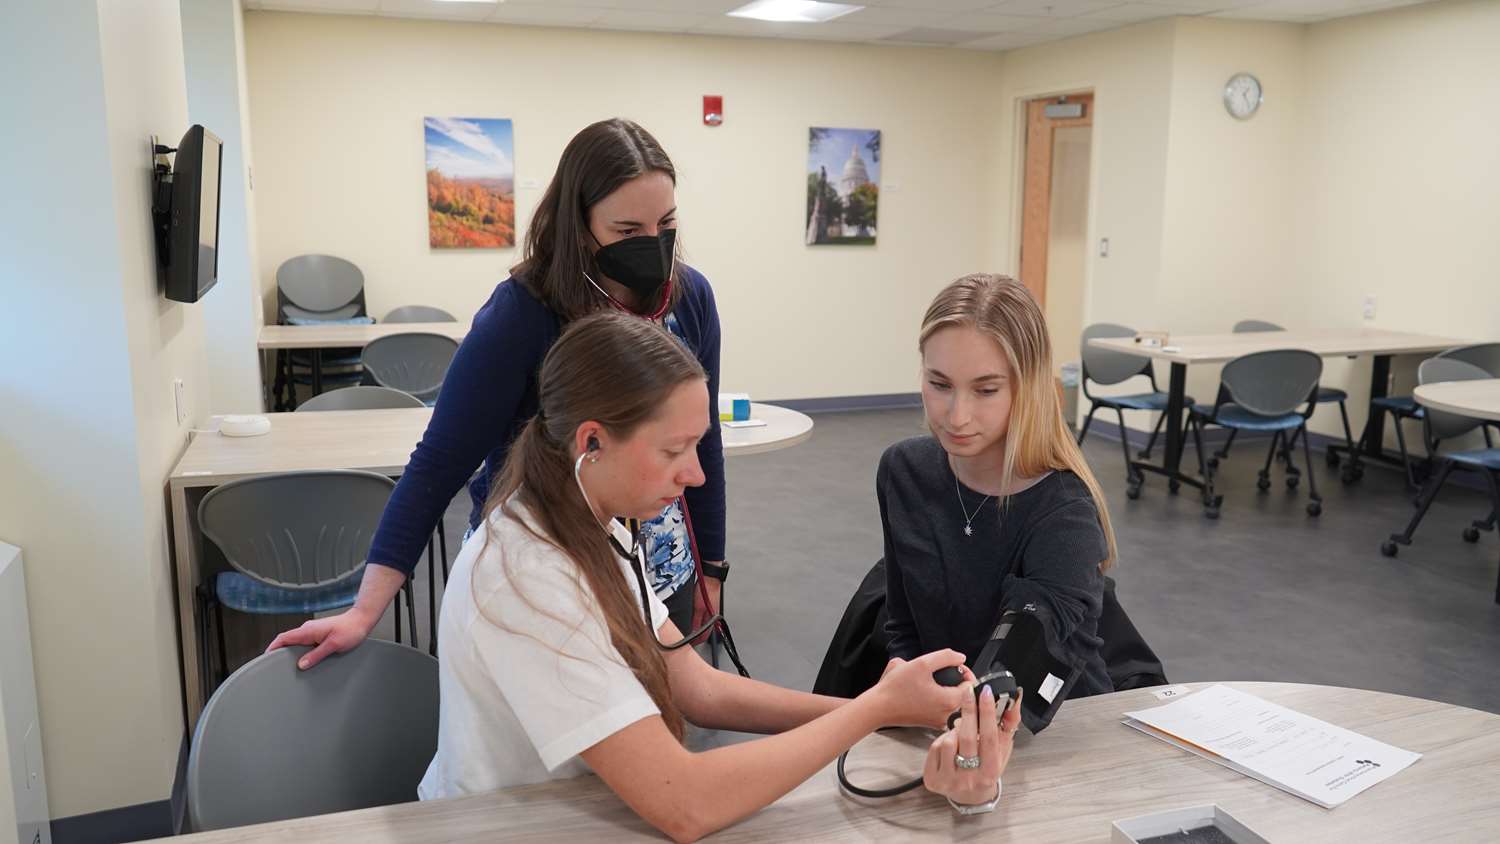 A female professor teaches to female students how to take a patient's blood pressure.